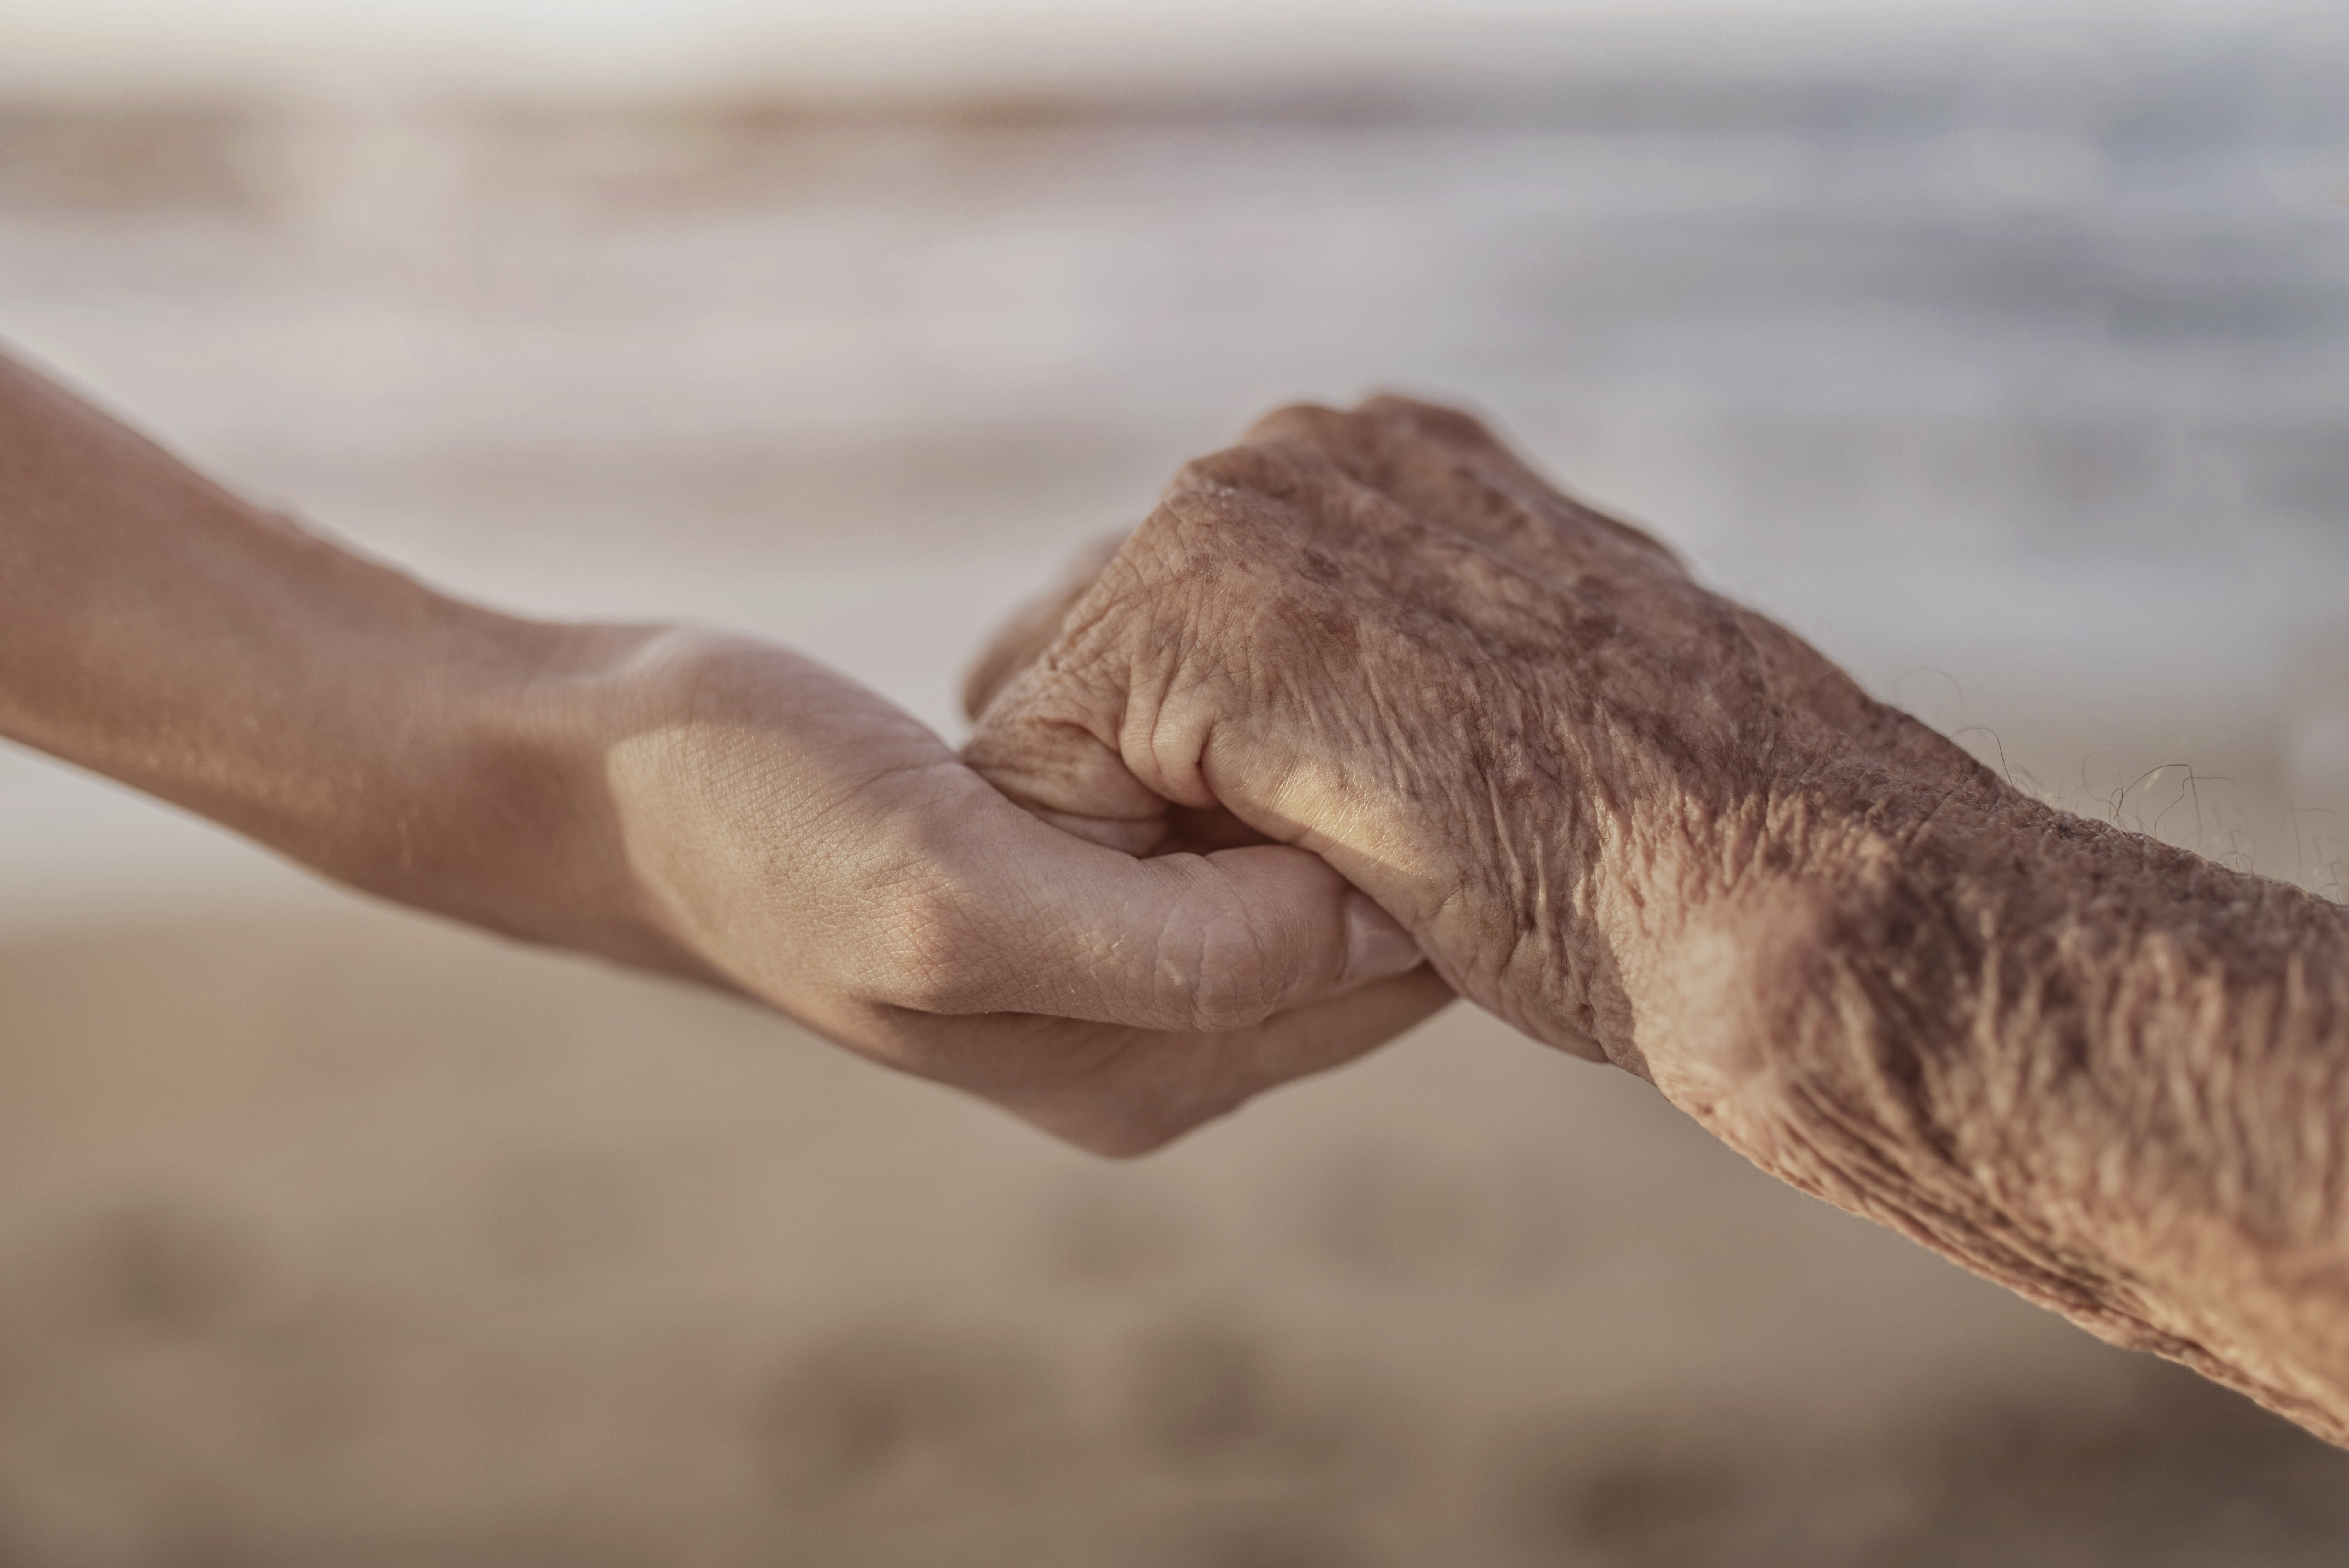 Change is in the air for those who prefer to die in dignity and surrounded by familiar faces at home or in residential care homes. Photo: Alamy